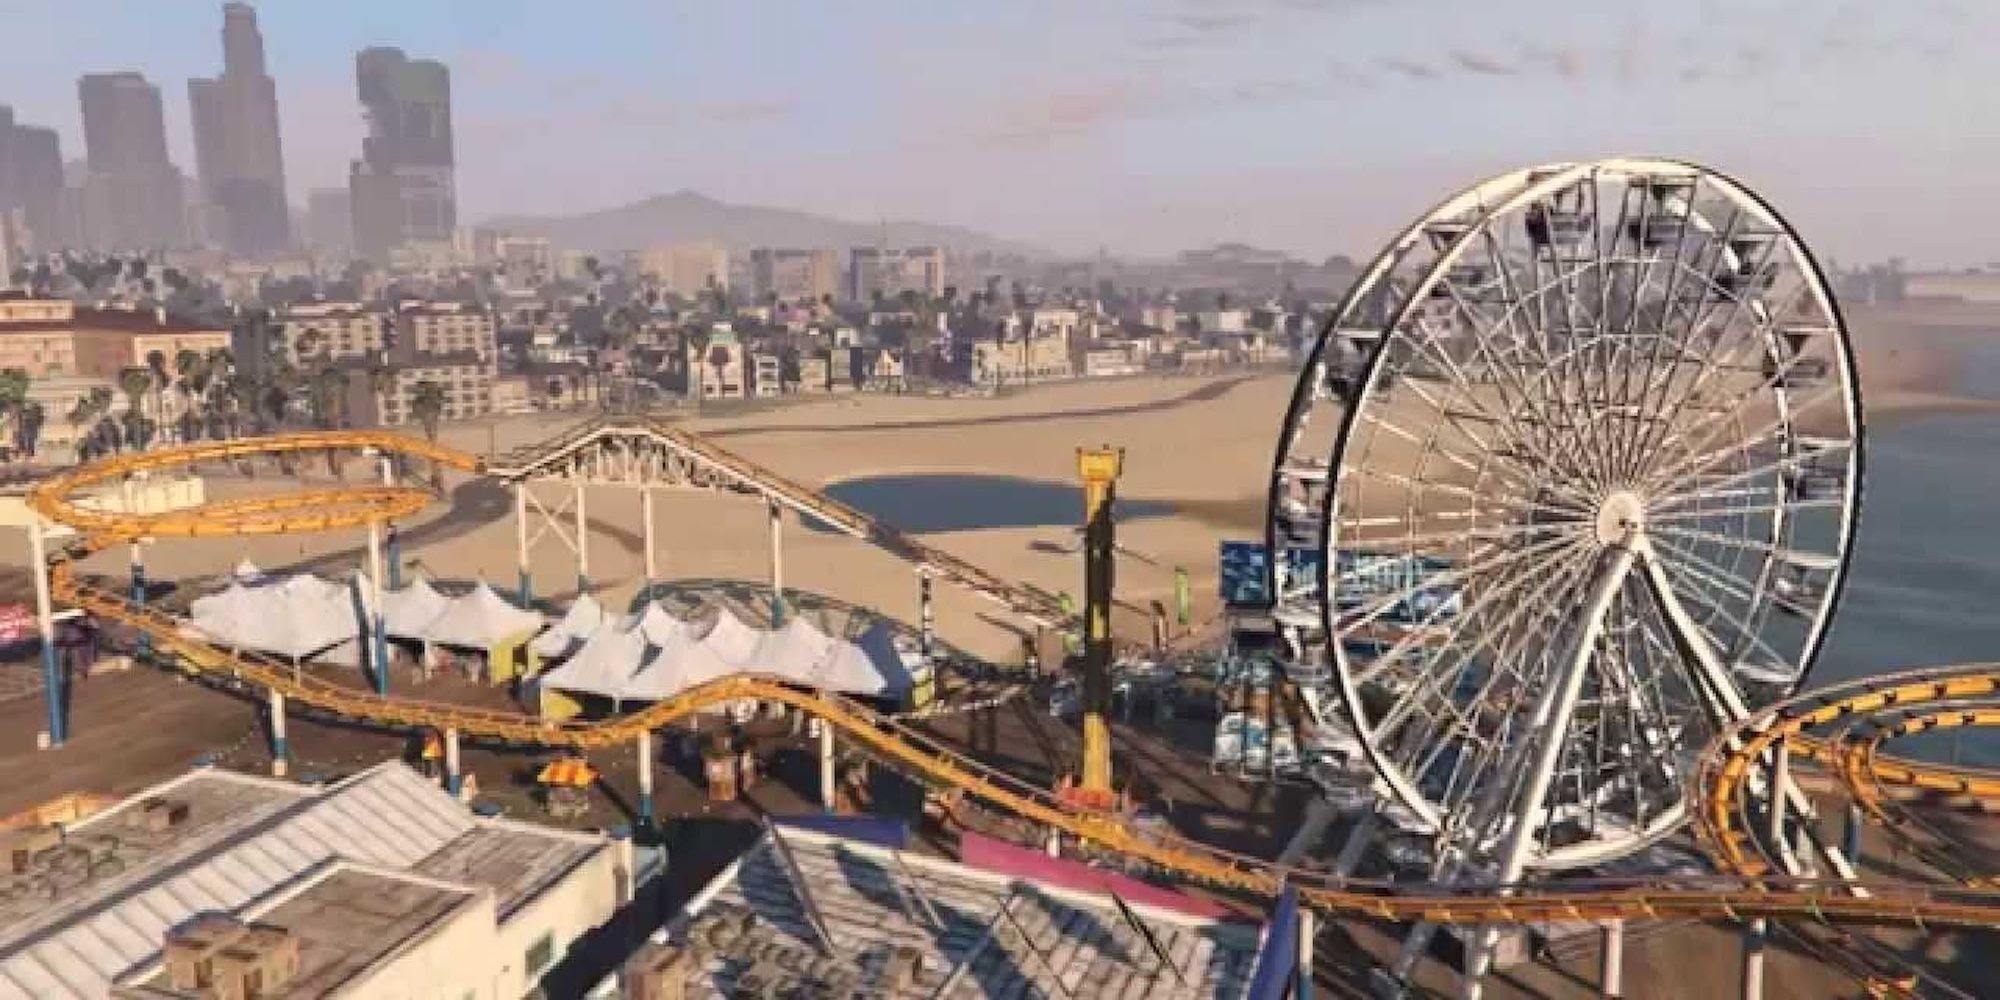 Grand Theft Auto 5 Del Perro Pier's Roller Coaster, Ferris Wheel, And Various Attractions Daytime